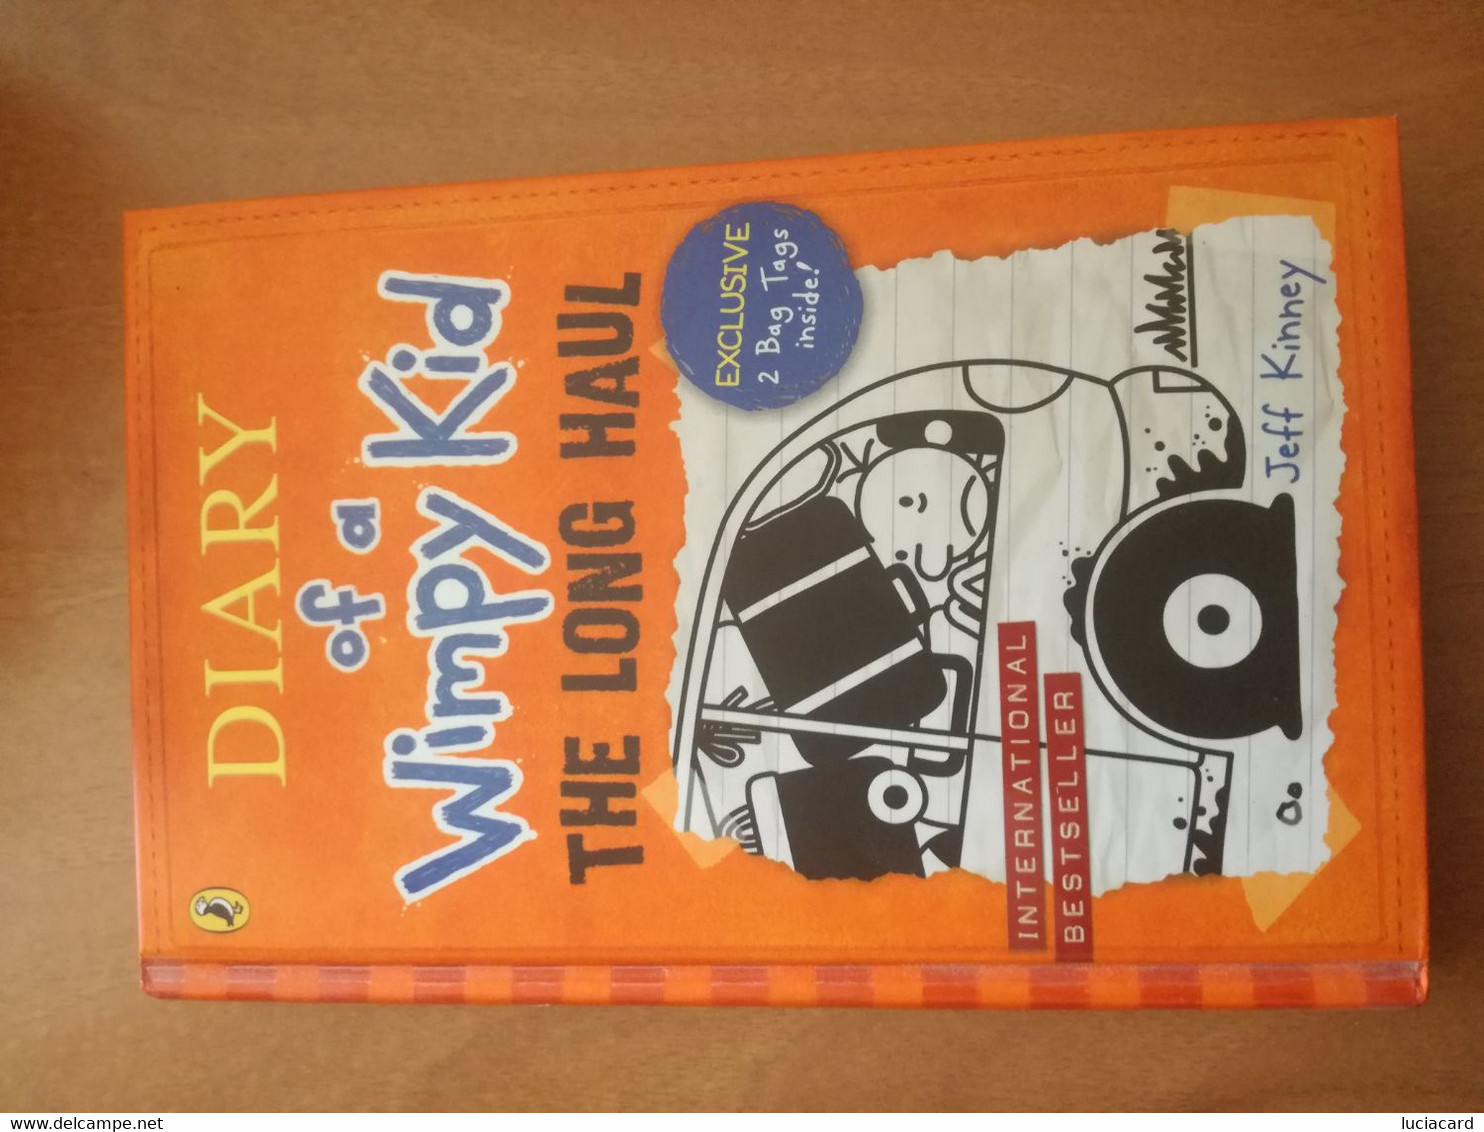 DIARY OF A WIMPY KID -THE LONG HAUL -KINNEY -PUFFIN BOOKS 2014 - Serien